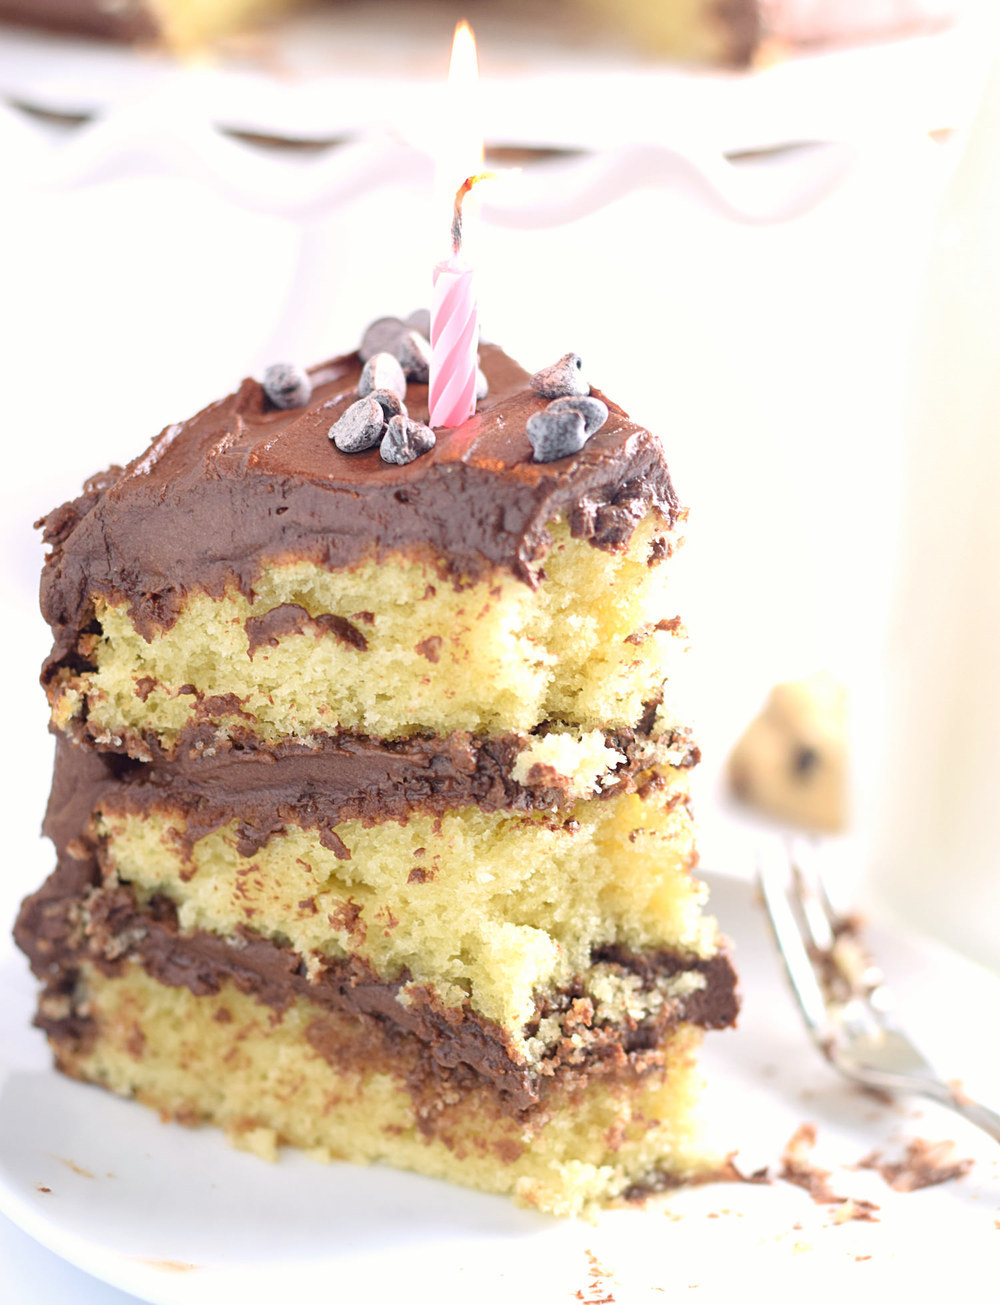 YELLOW LAYER CAKE WITH CHOCOLATE BUTTERCREAM FROSTING